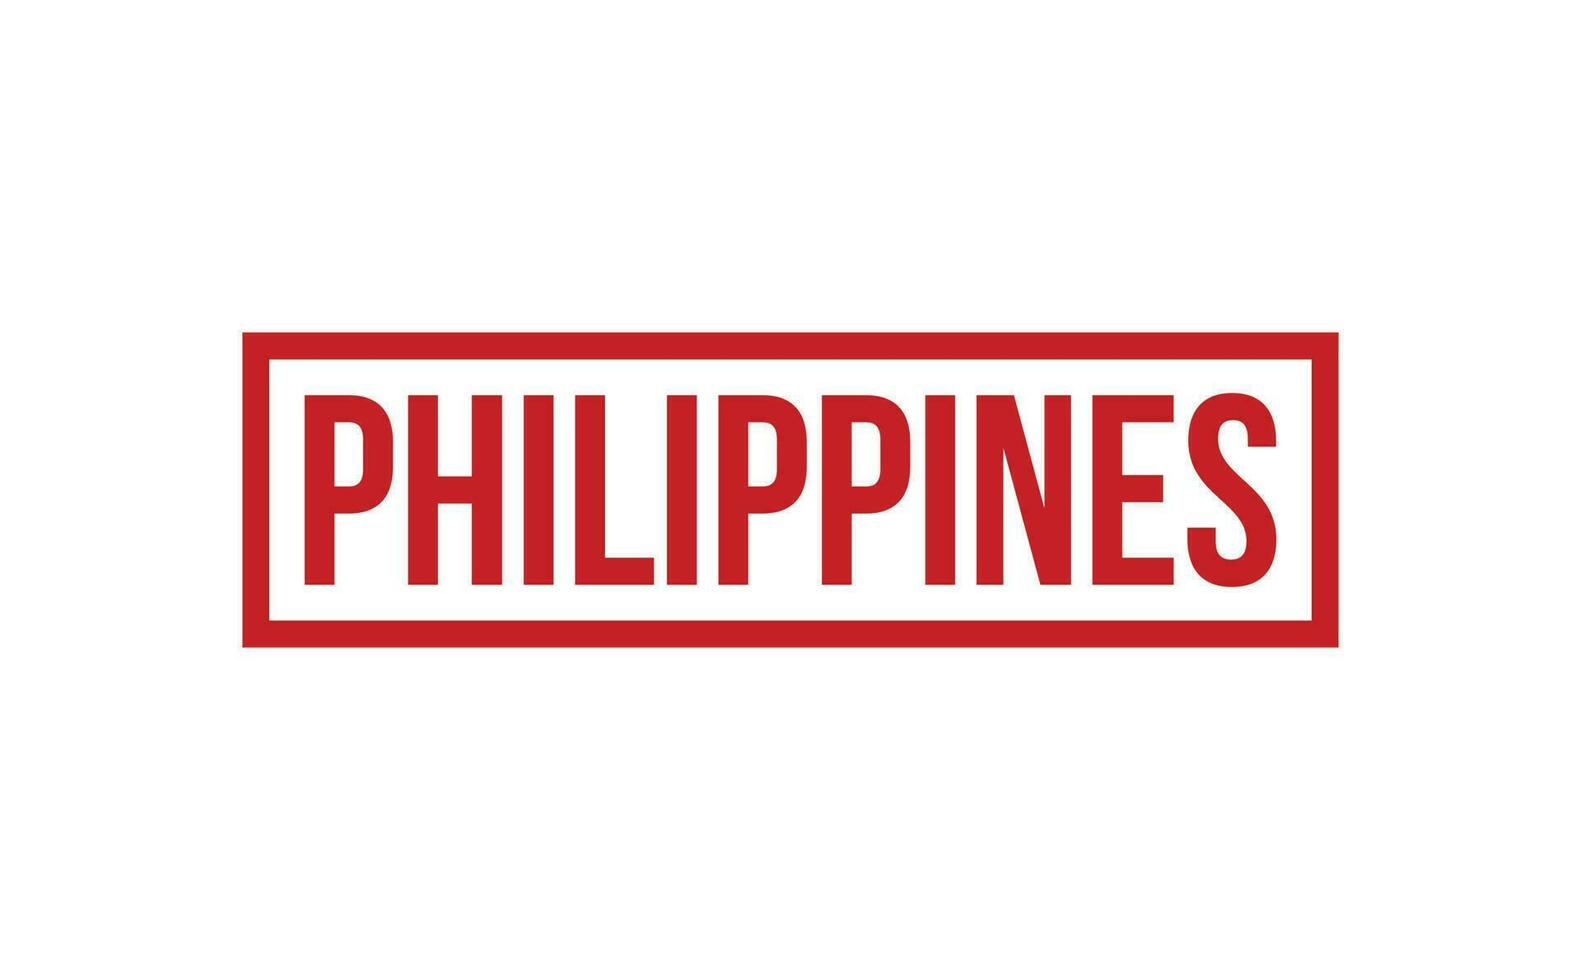 Philippines Rubber Stamp Seal Vector